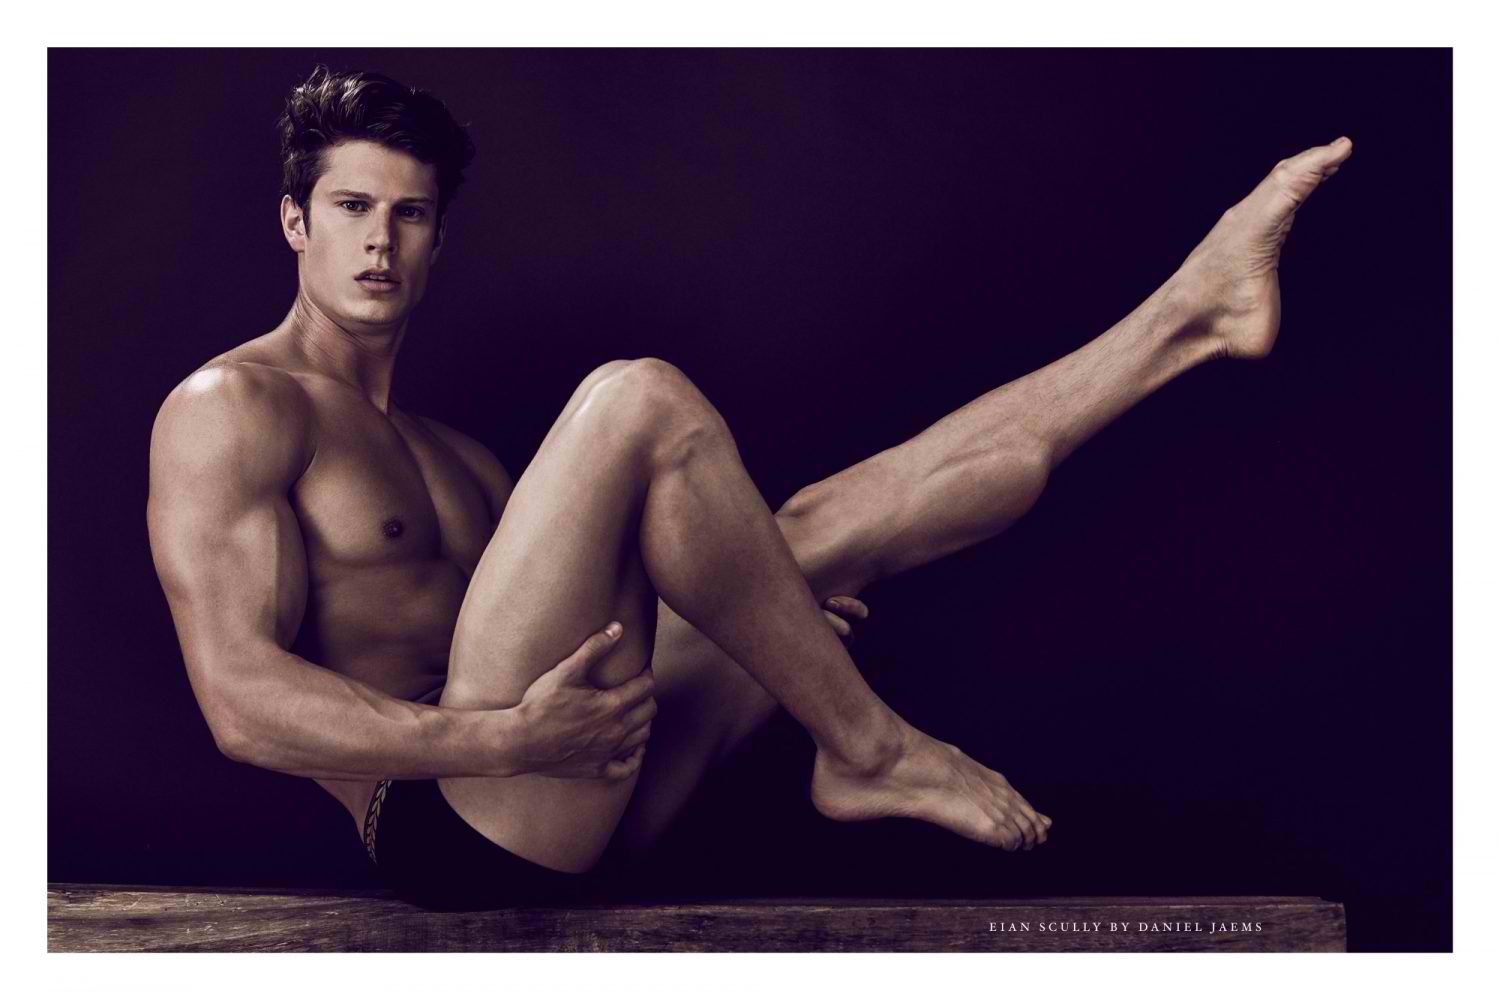 Eian-Scully-by-Daniel-Jaems-Obsession-No17-004-1500x1000